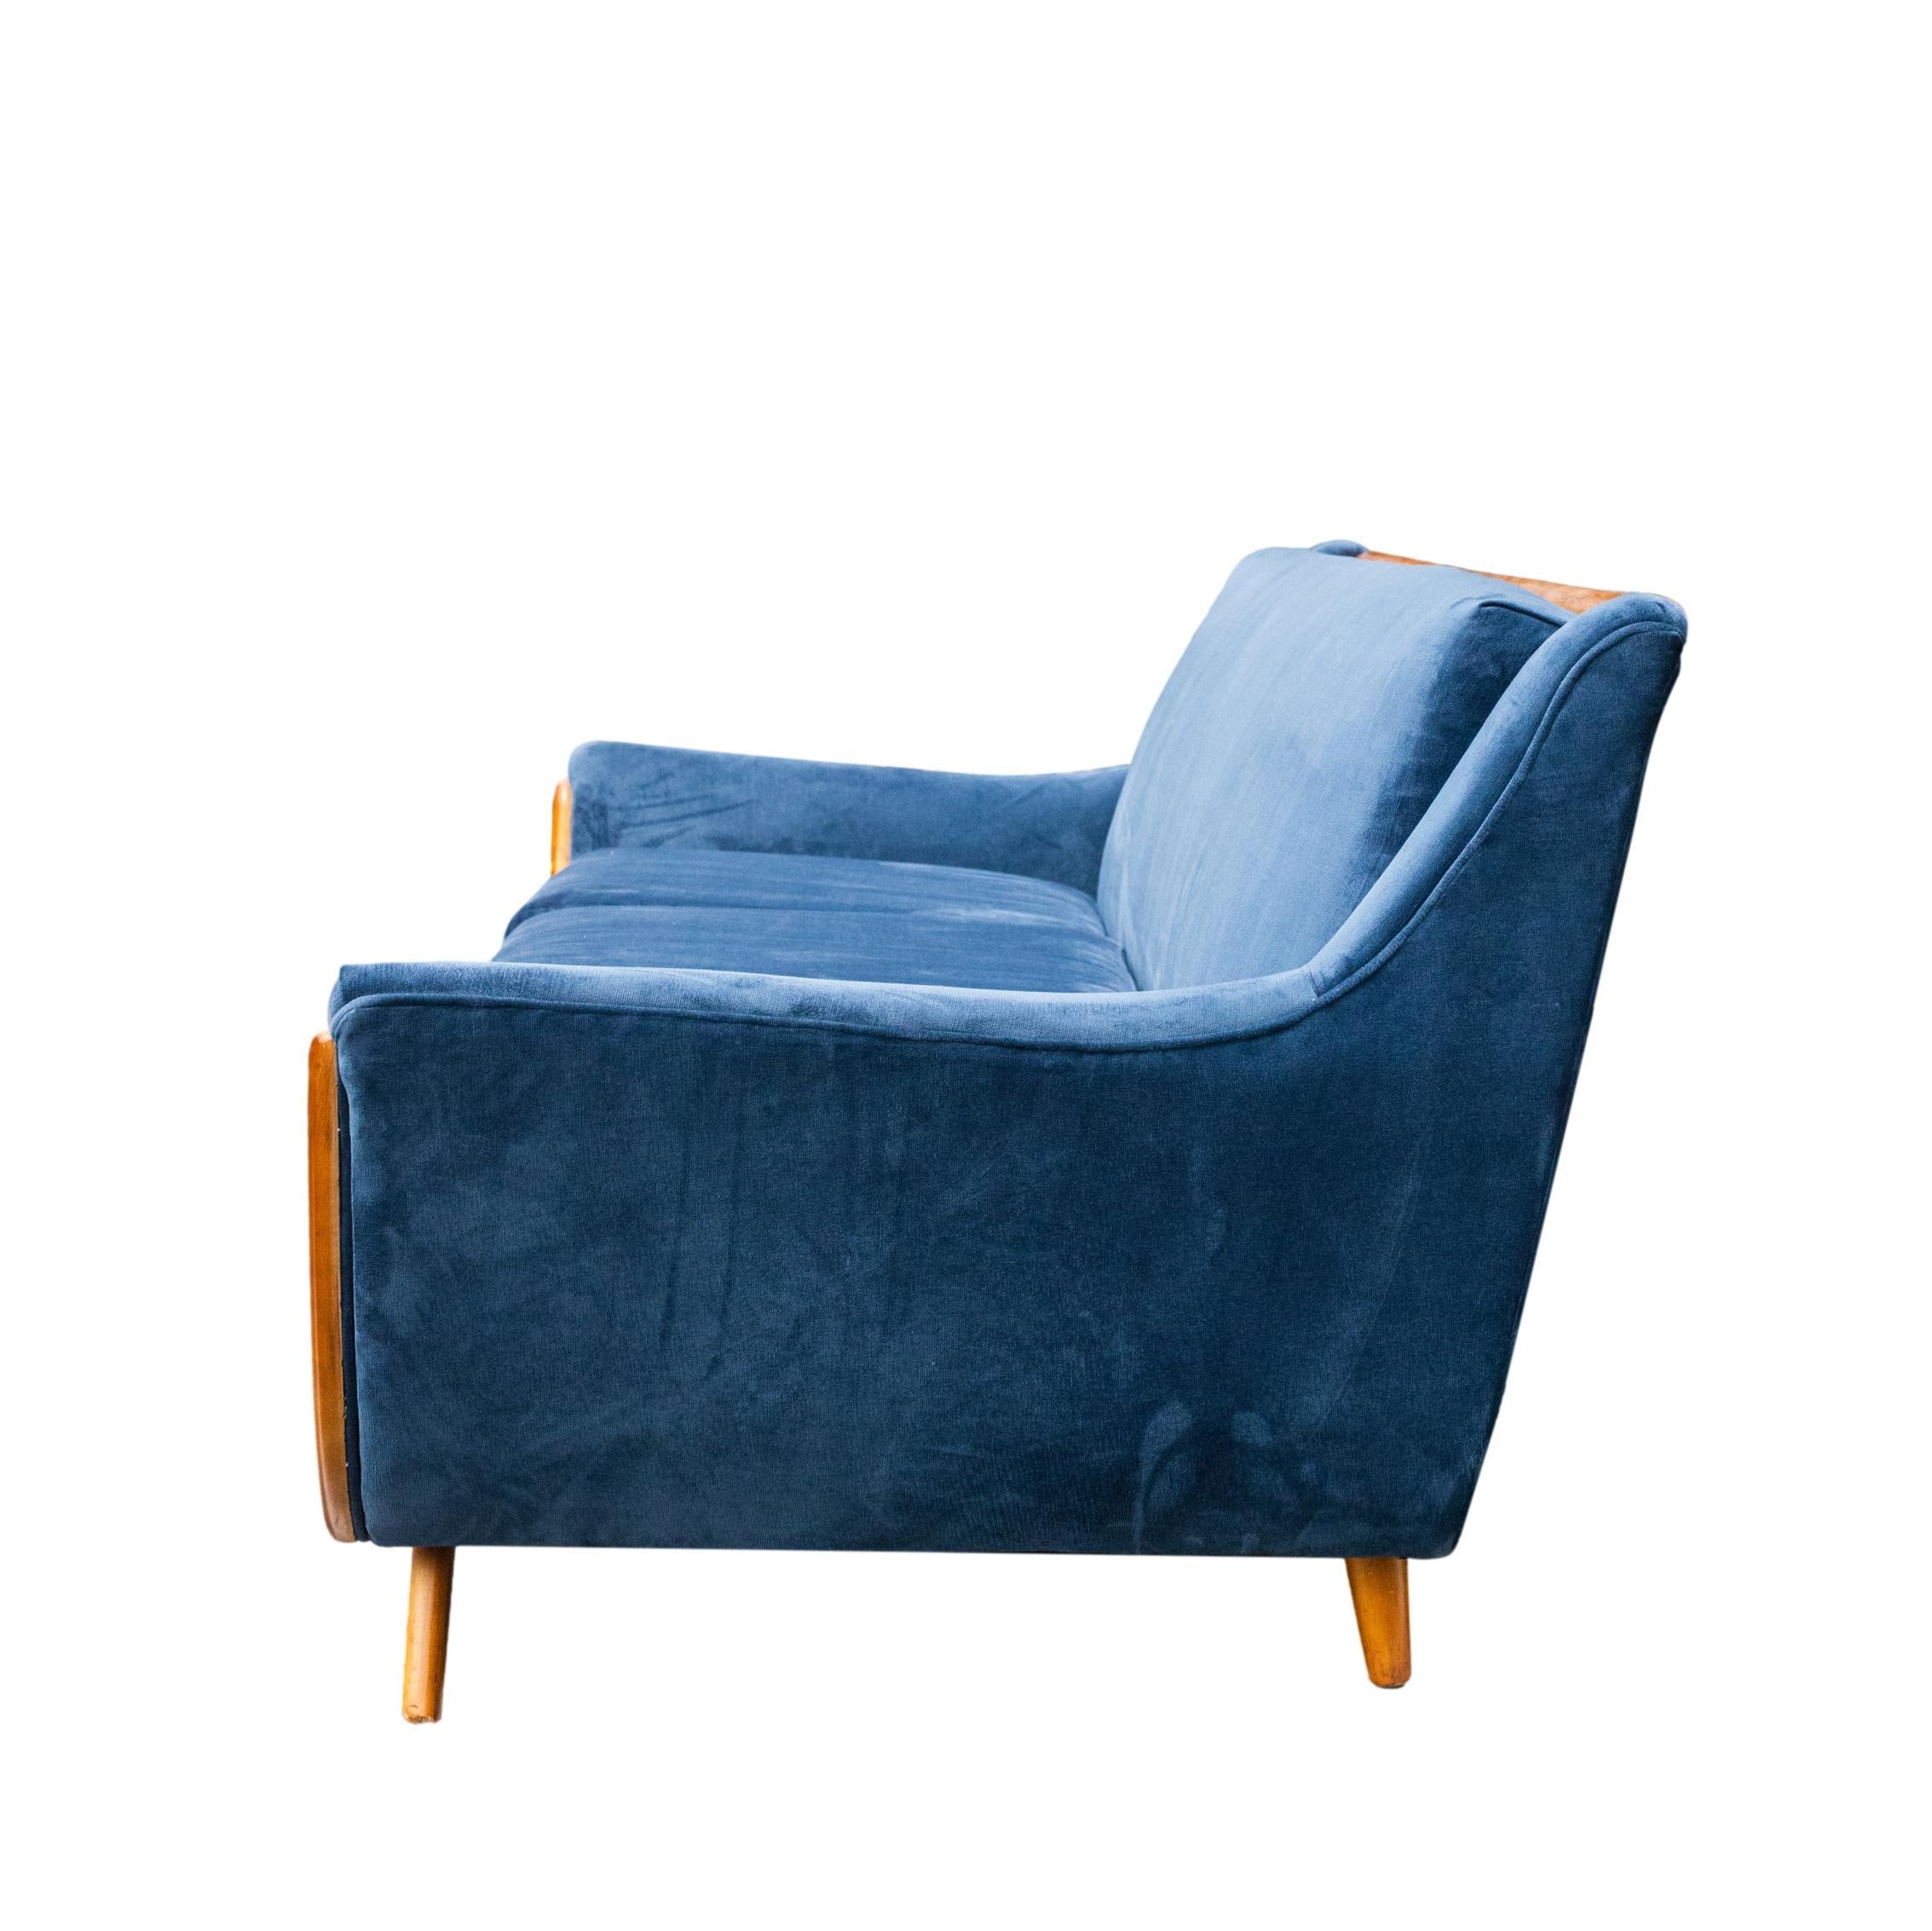 Mid-Century Modern Adrian Pearsall-Style Sofa Newly Reupholstered in Blue Velvet, ca. 1960